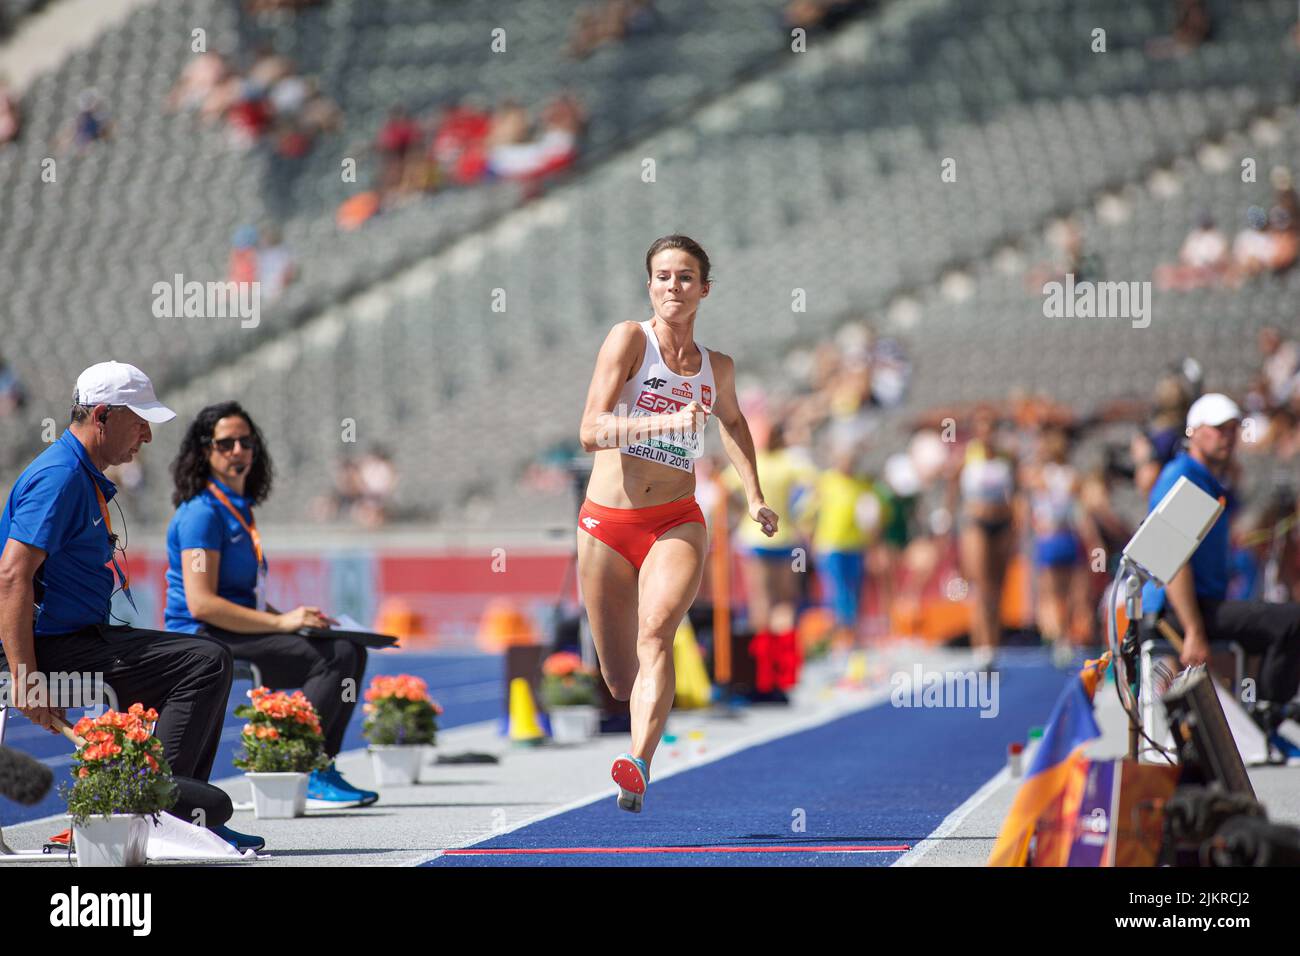 Anna Jagaciak participating in the triple jump at the European Athletics Championships in Berlin 2018. Stock Photo